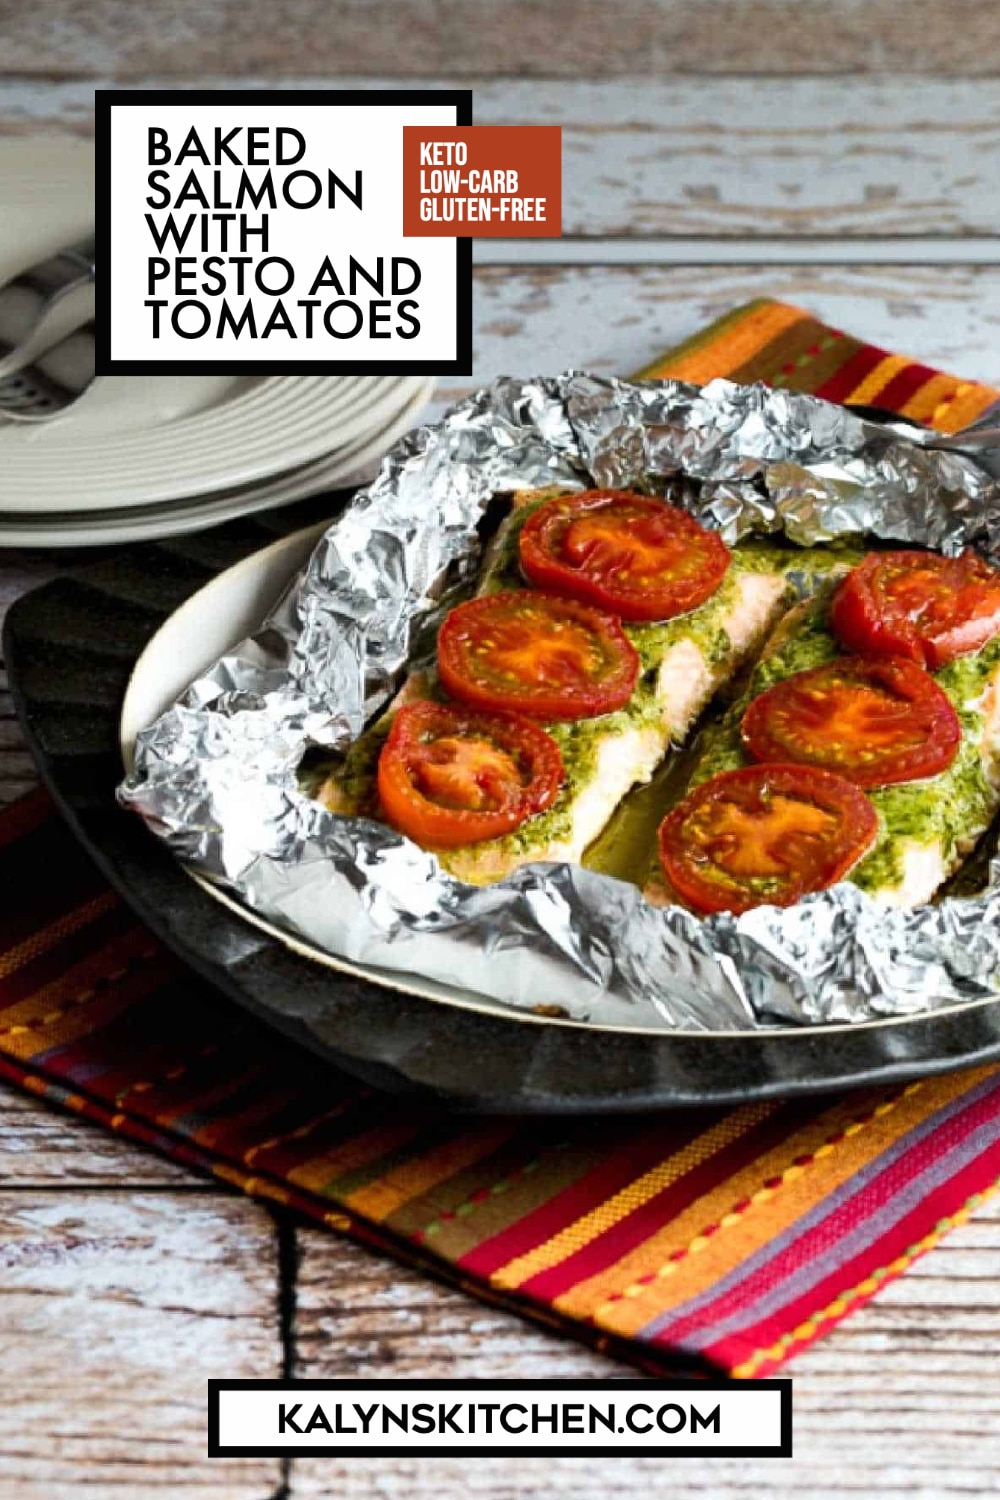 Pinterest image of Baked Salmon with Pesto and Tomatoes